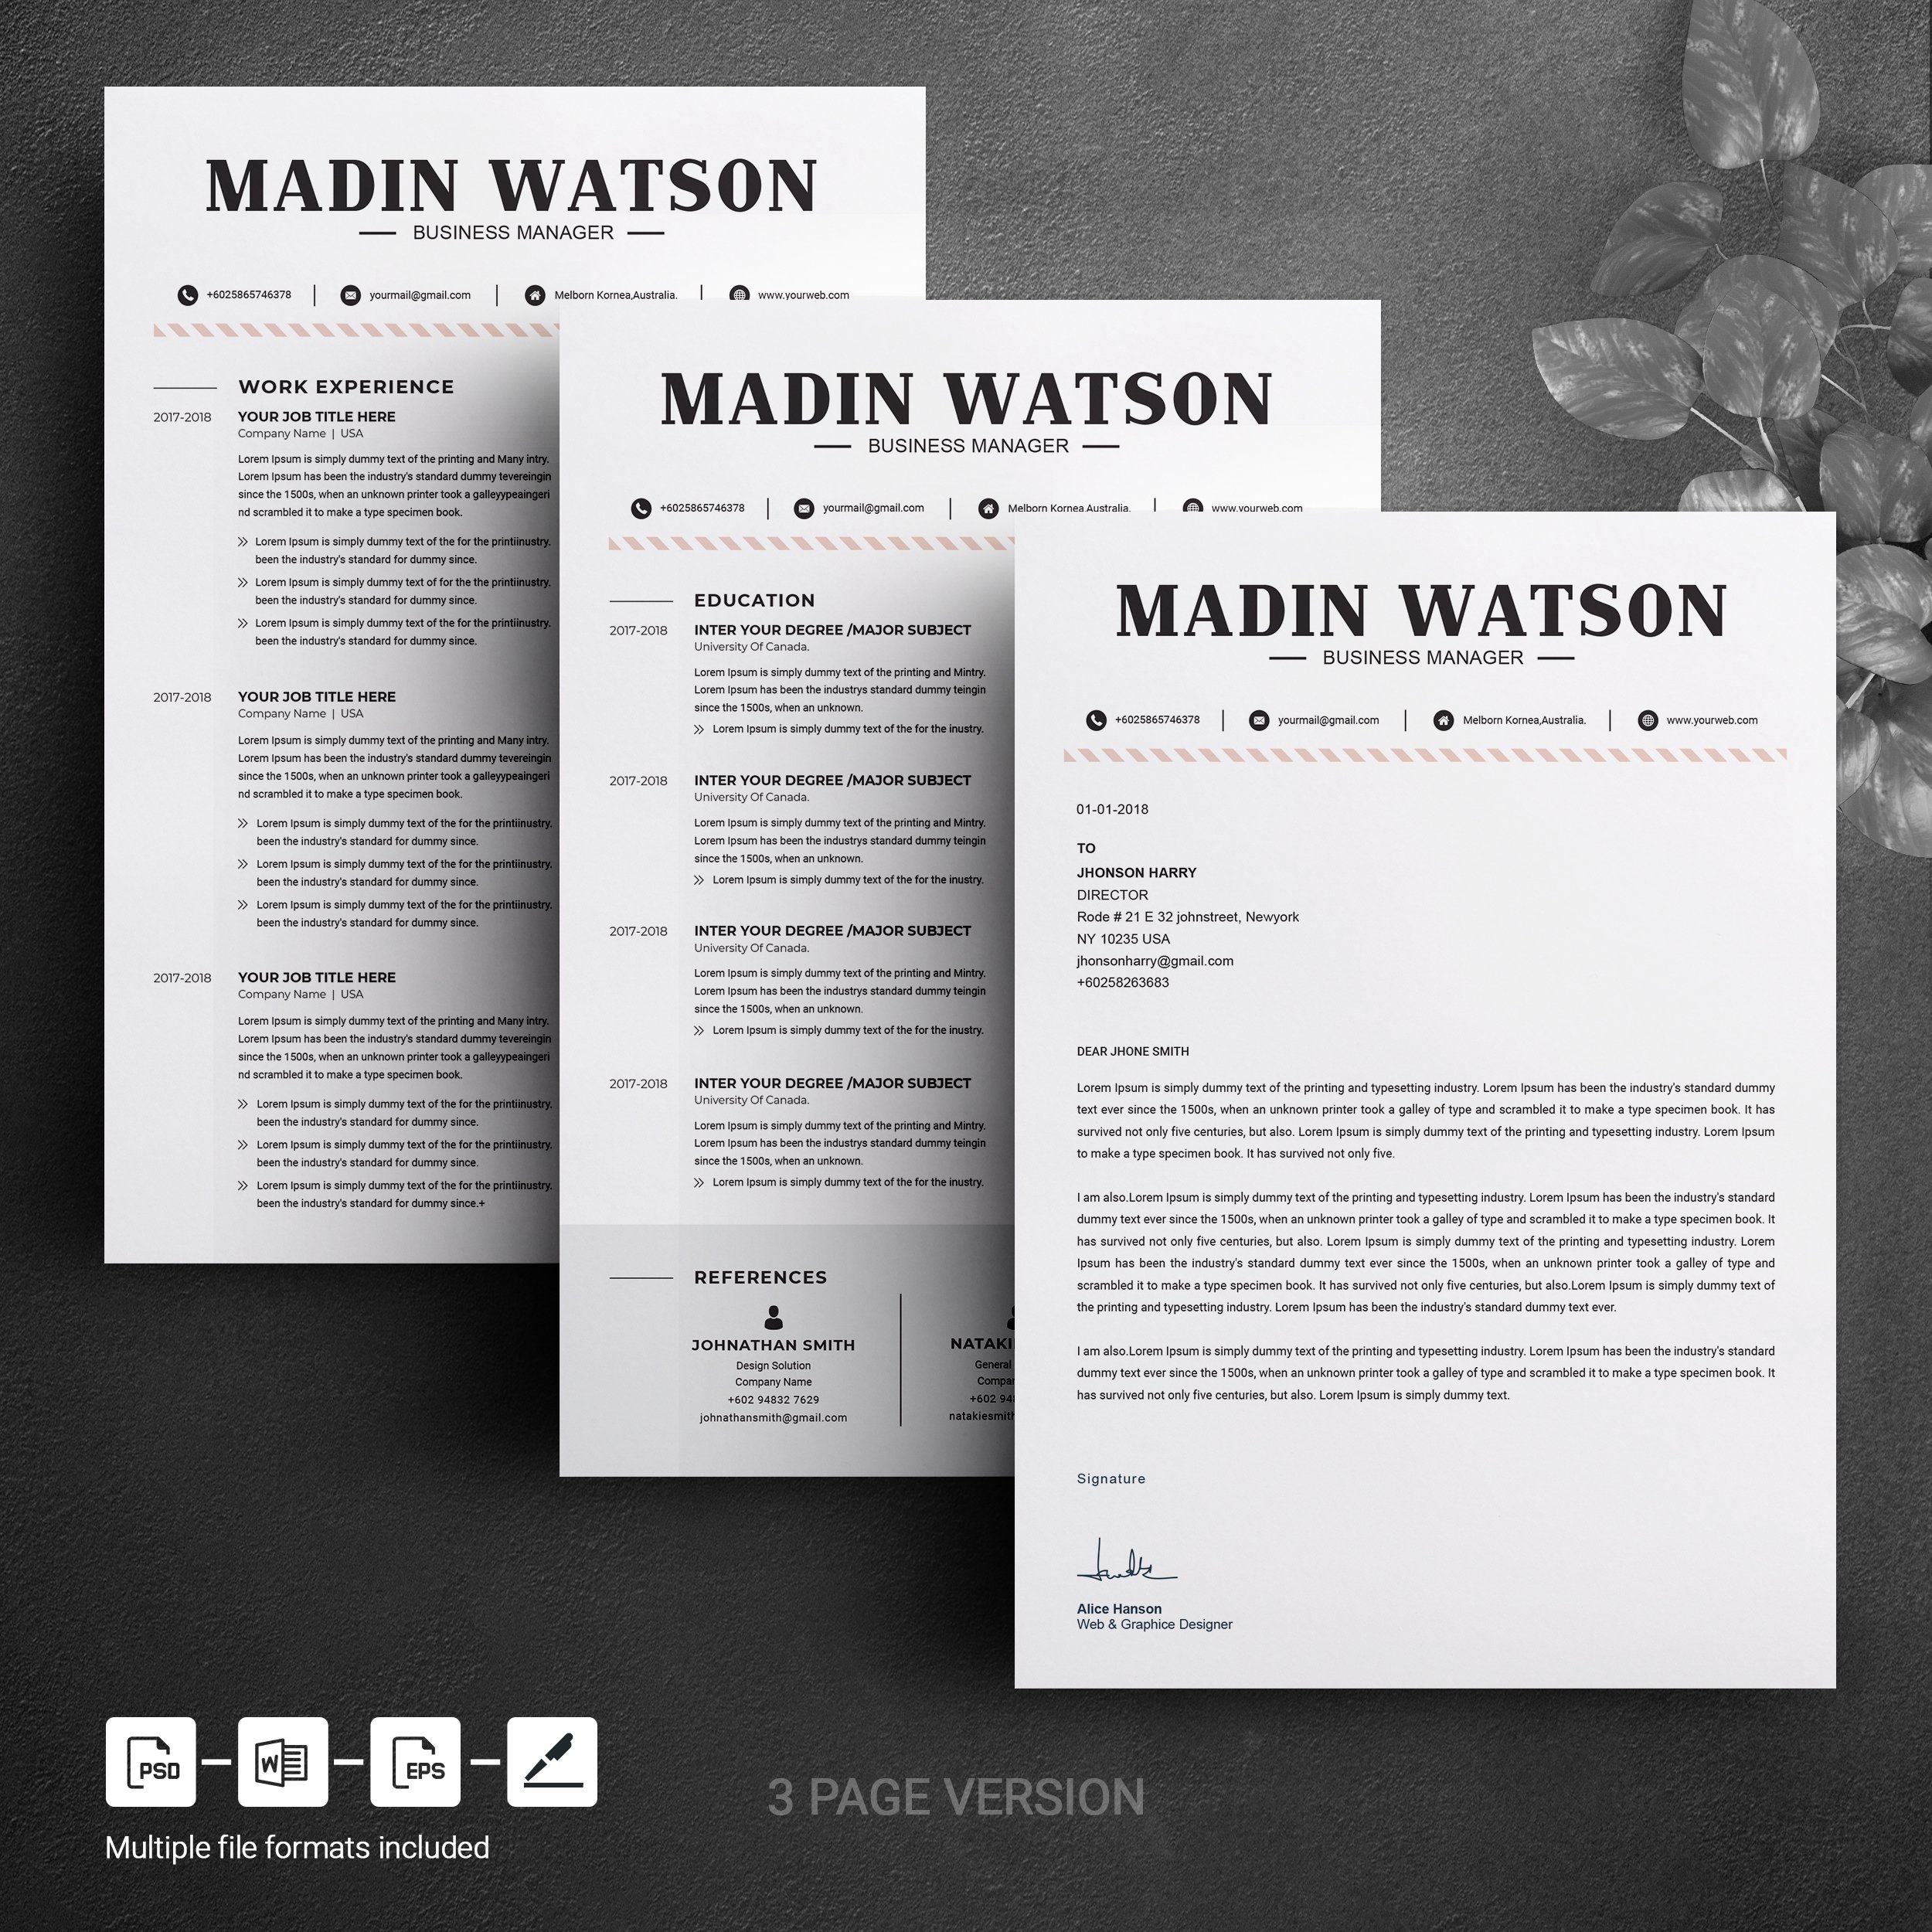 03 3 page free resume design template 196